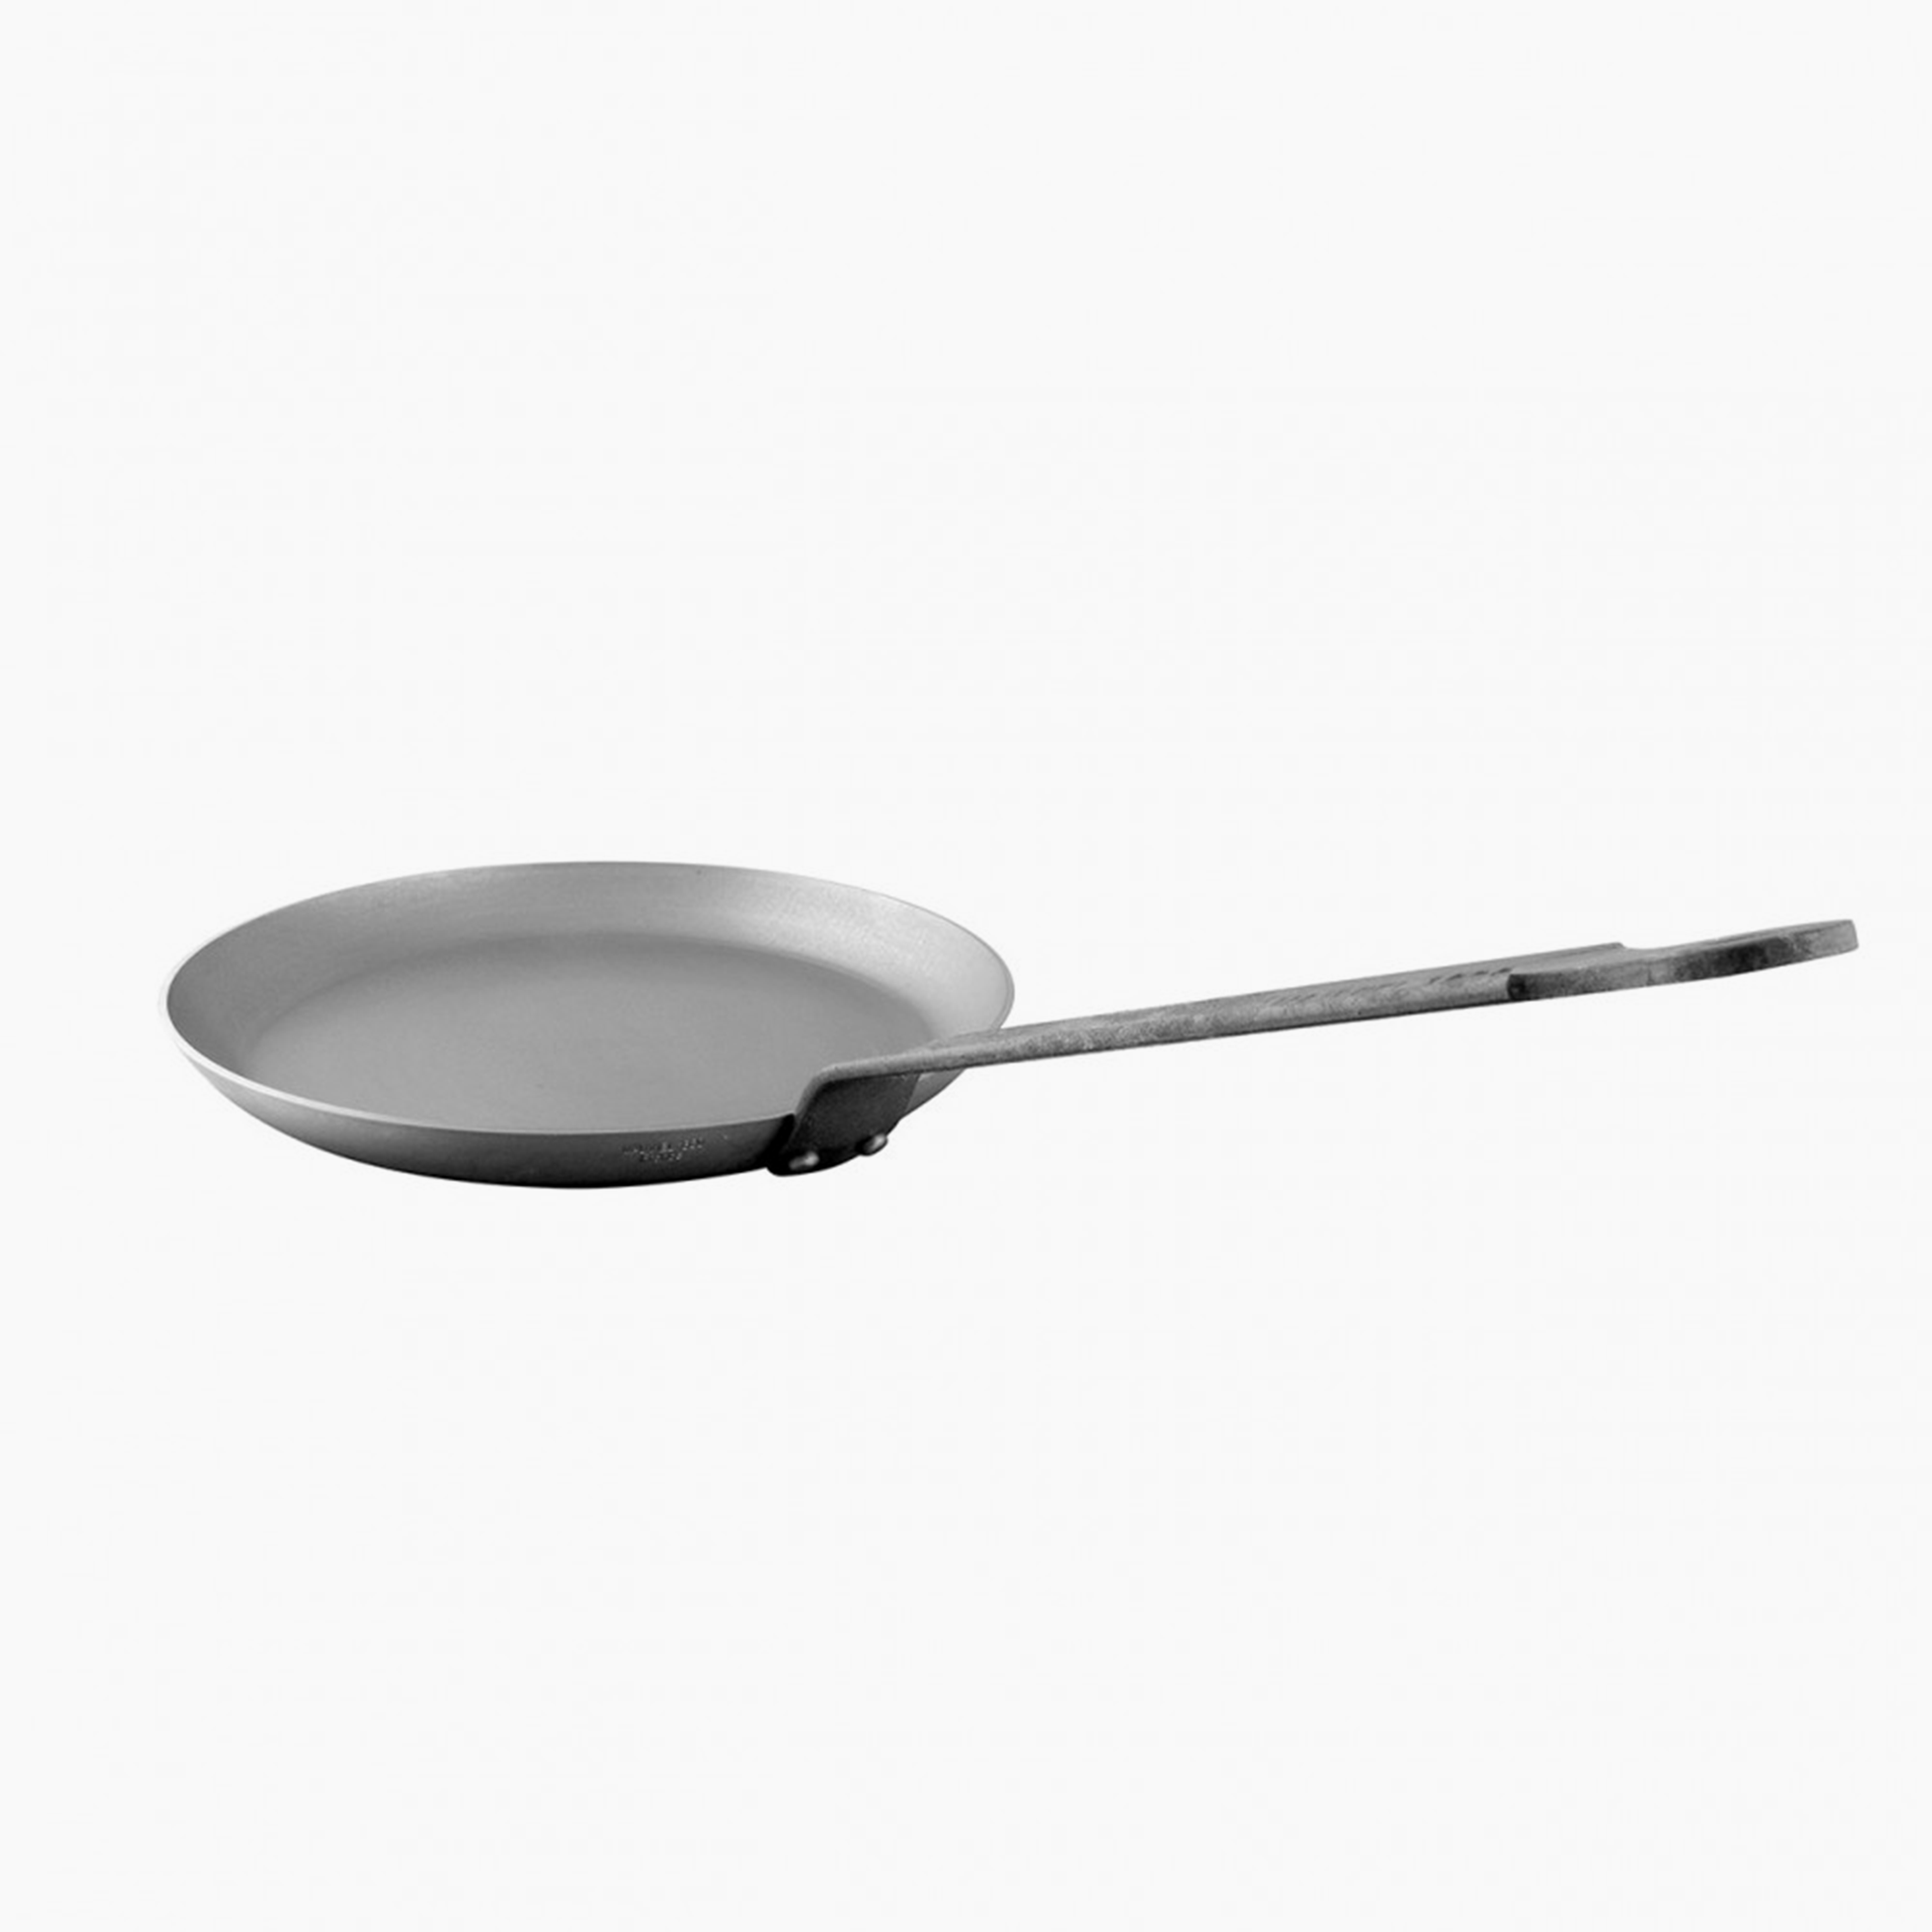 Mauviel M'STEEL Black Carbon Steel Crepe Pan With Iron Handle, 9.4-In